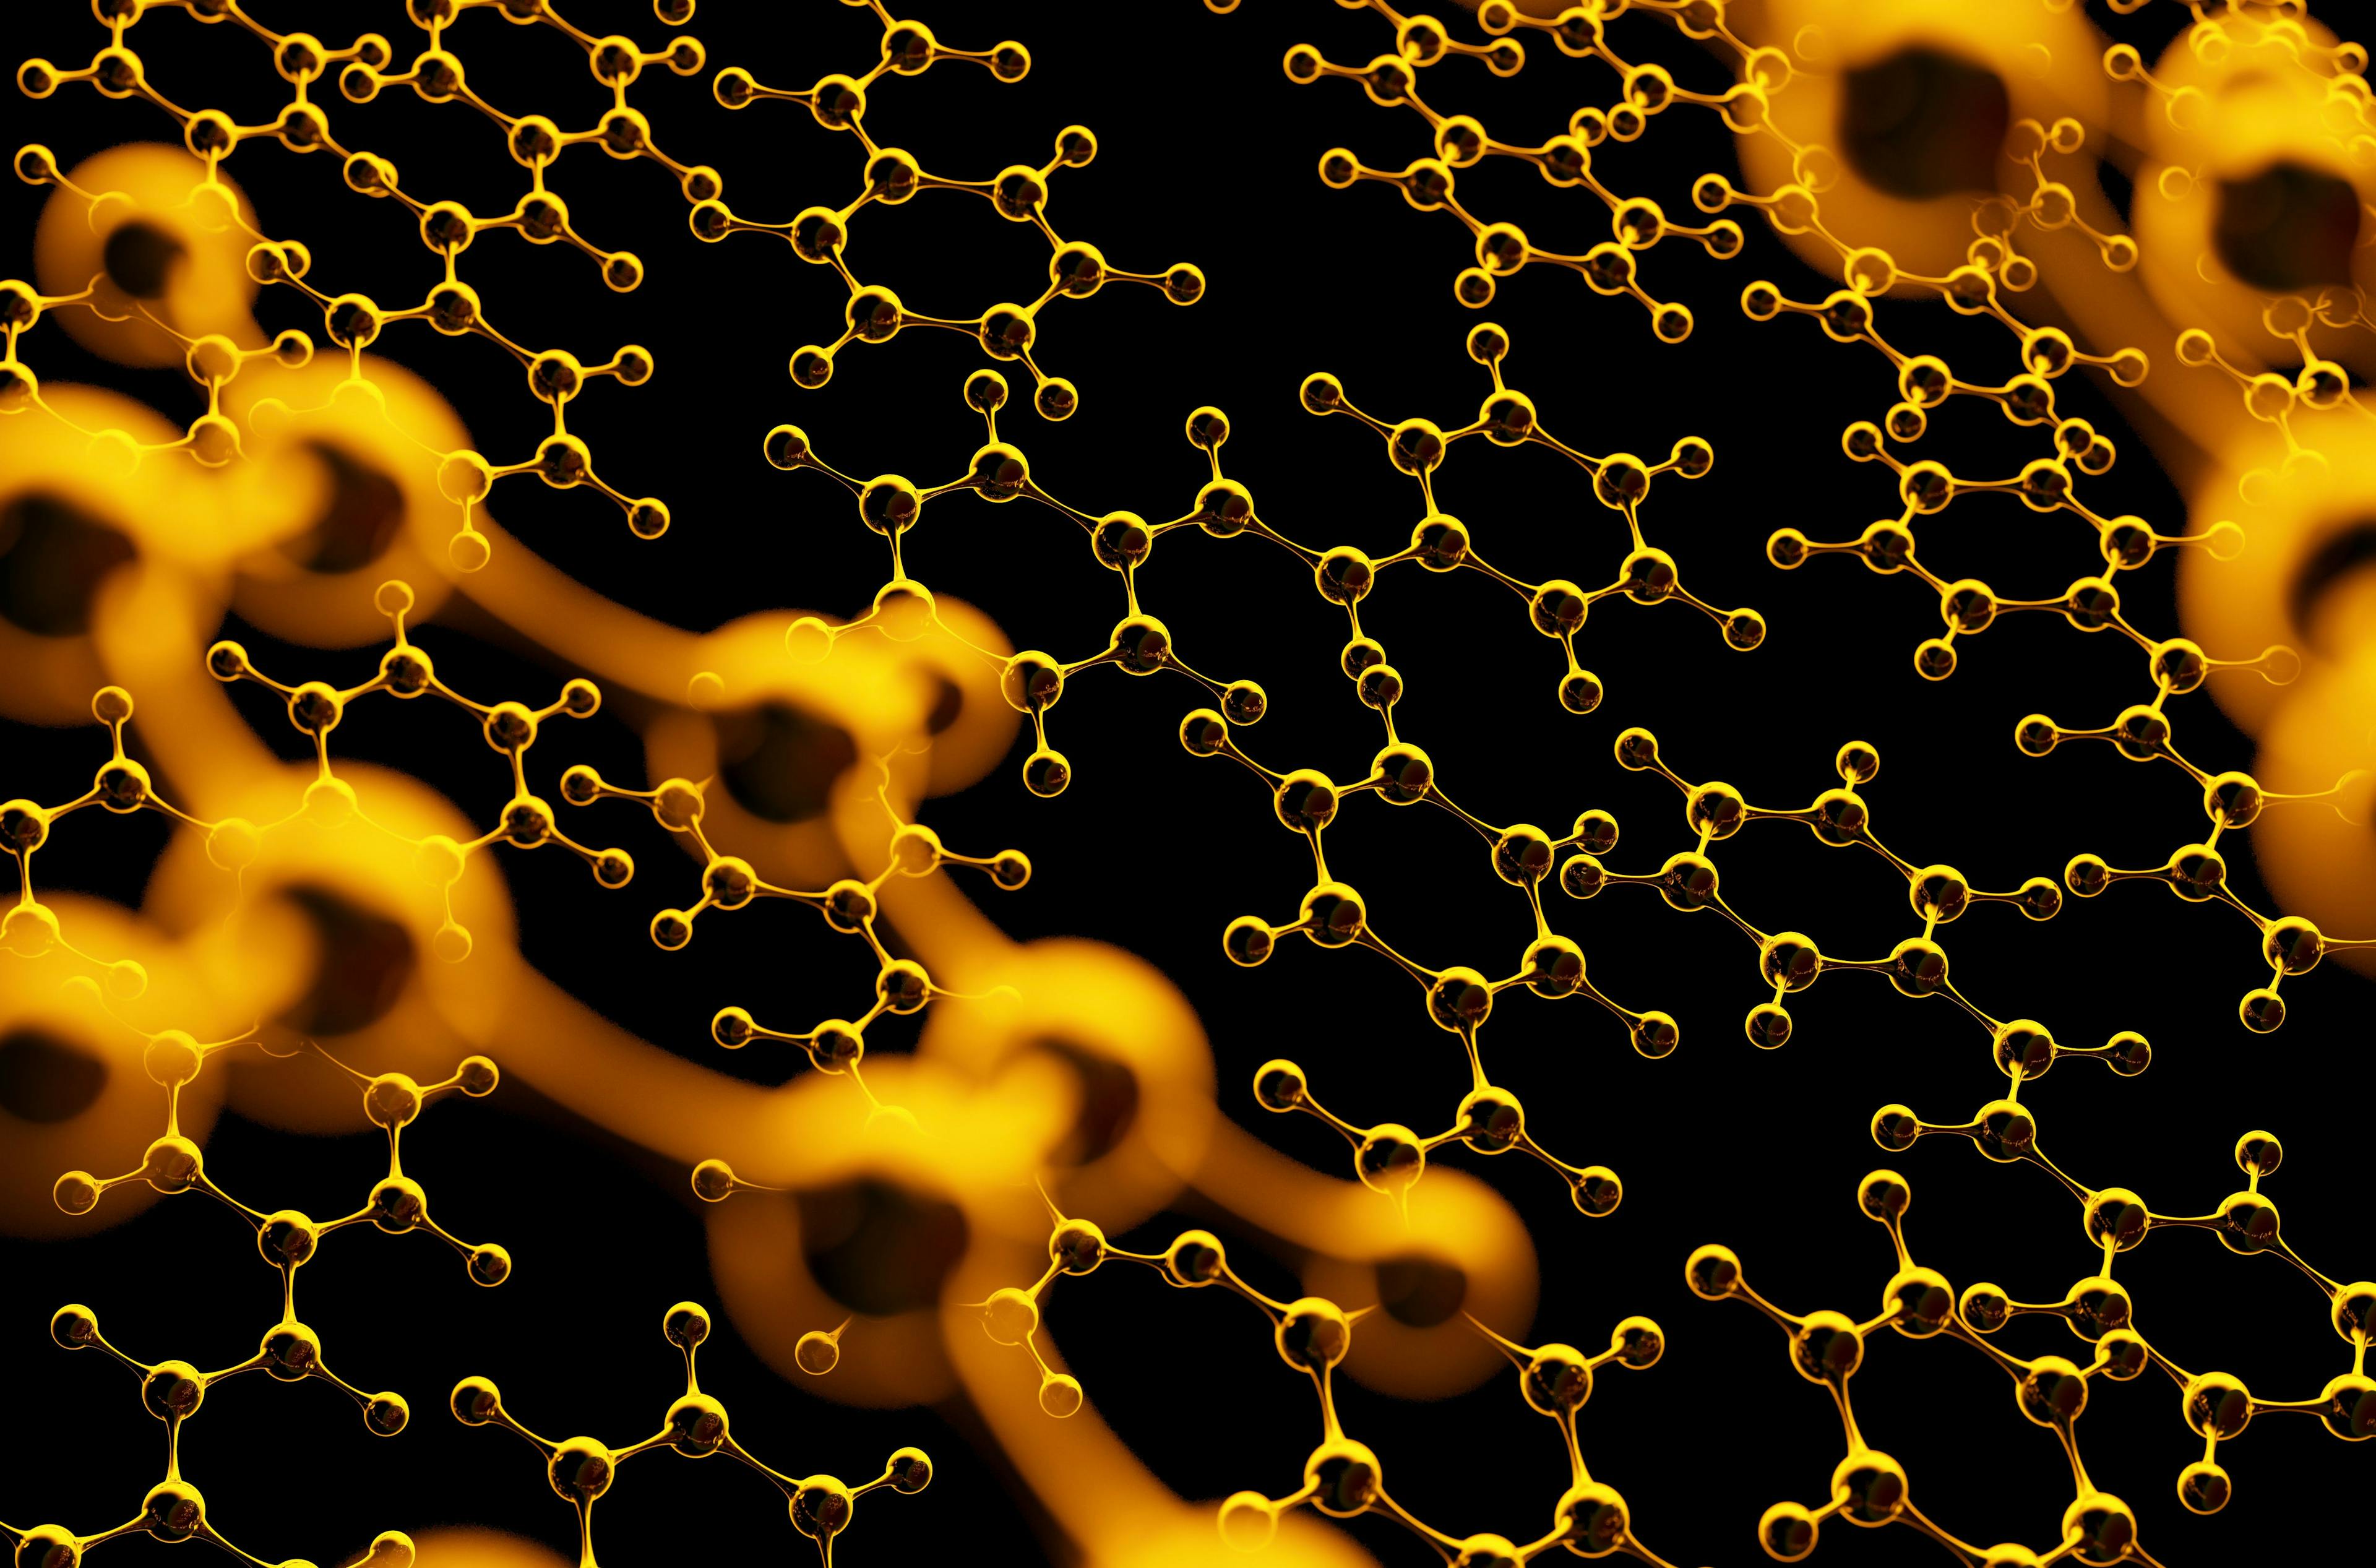 Molecule structure. Science background with hydrocarbon molecules. 3d illustration. | Image Credit: © simone_n - stock.adobe.com